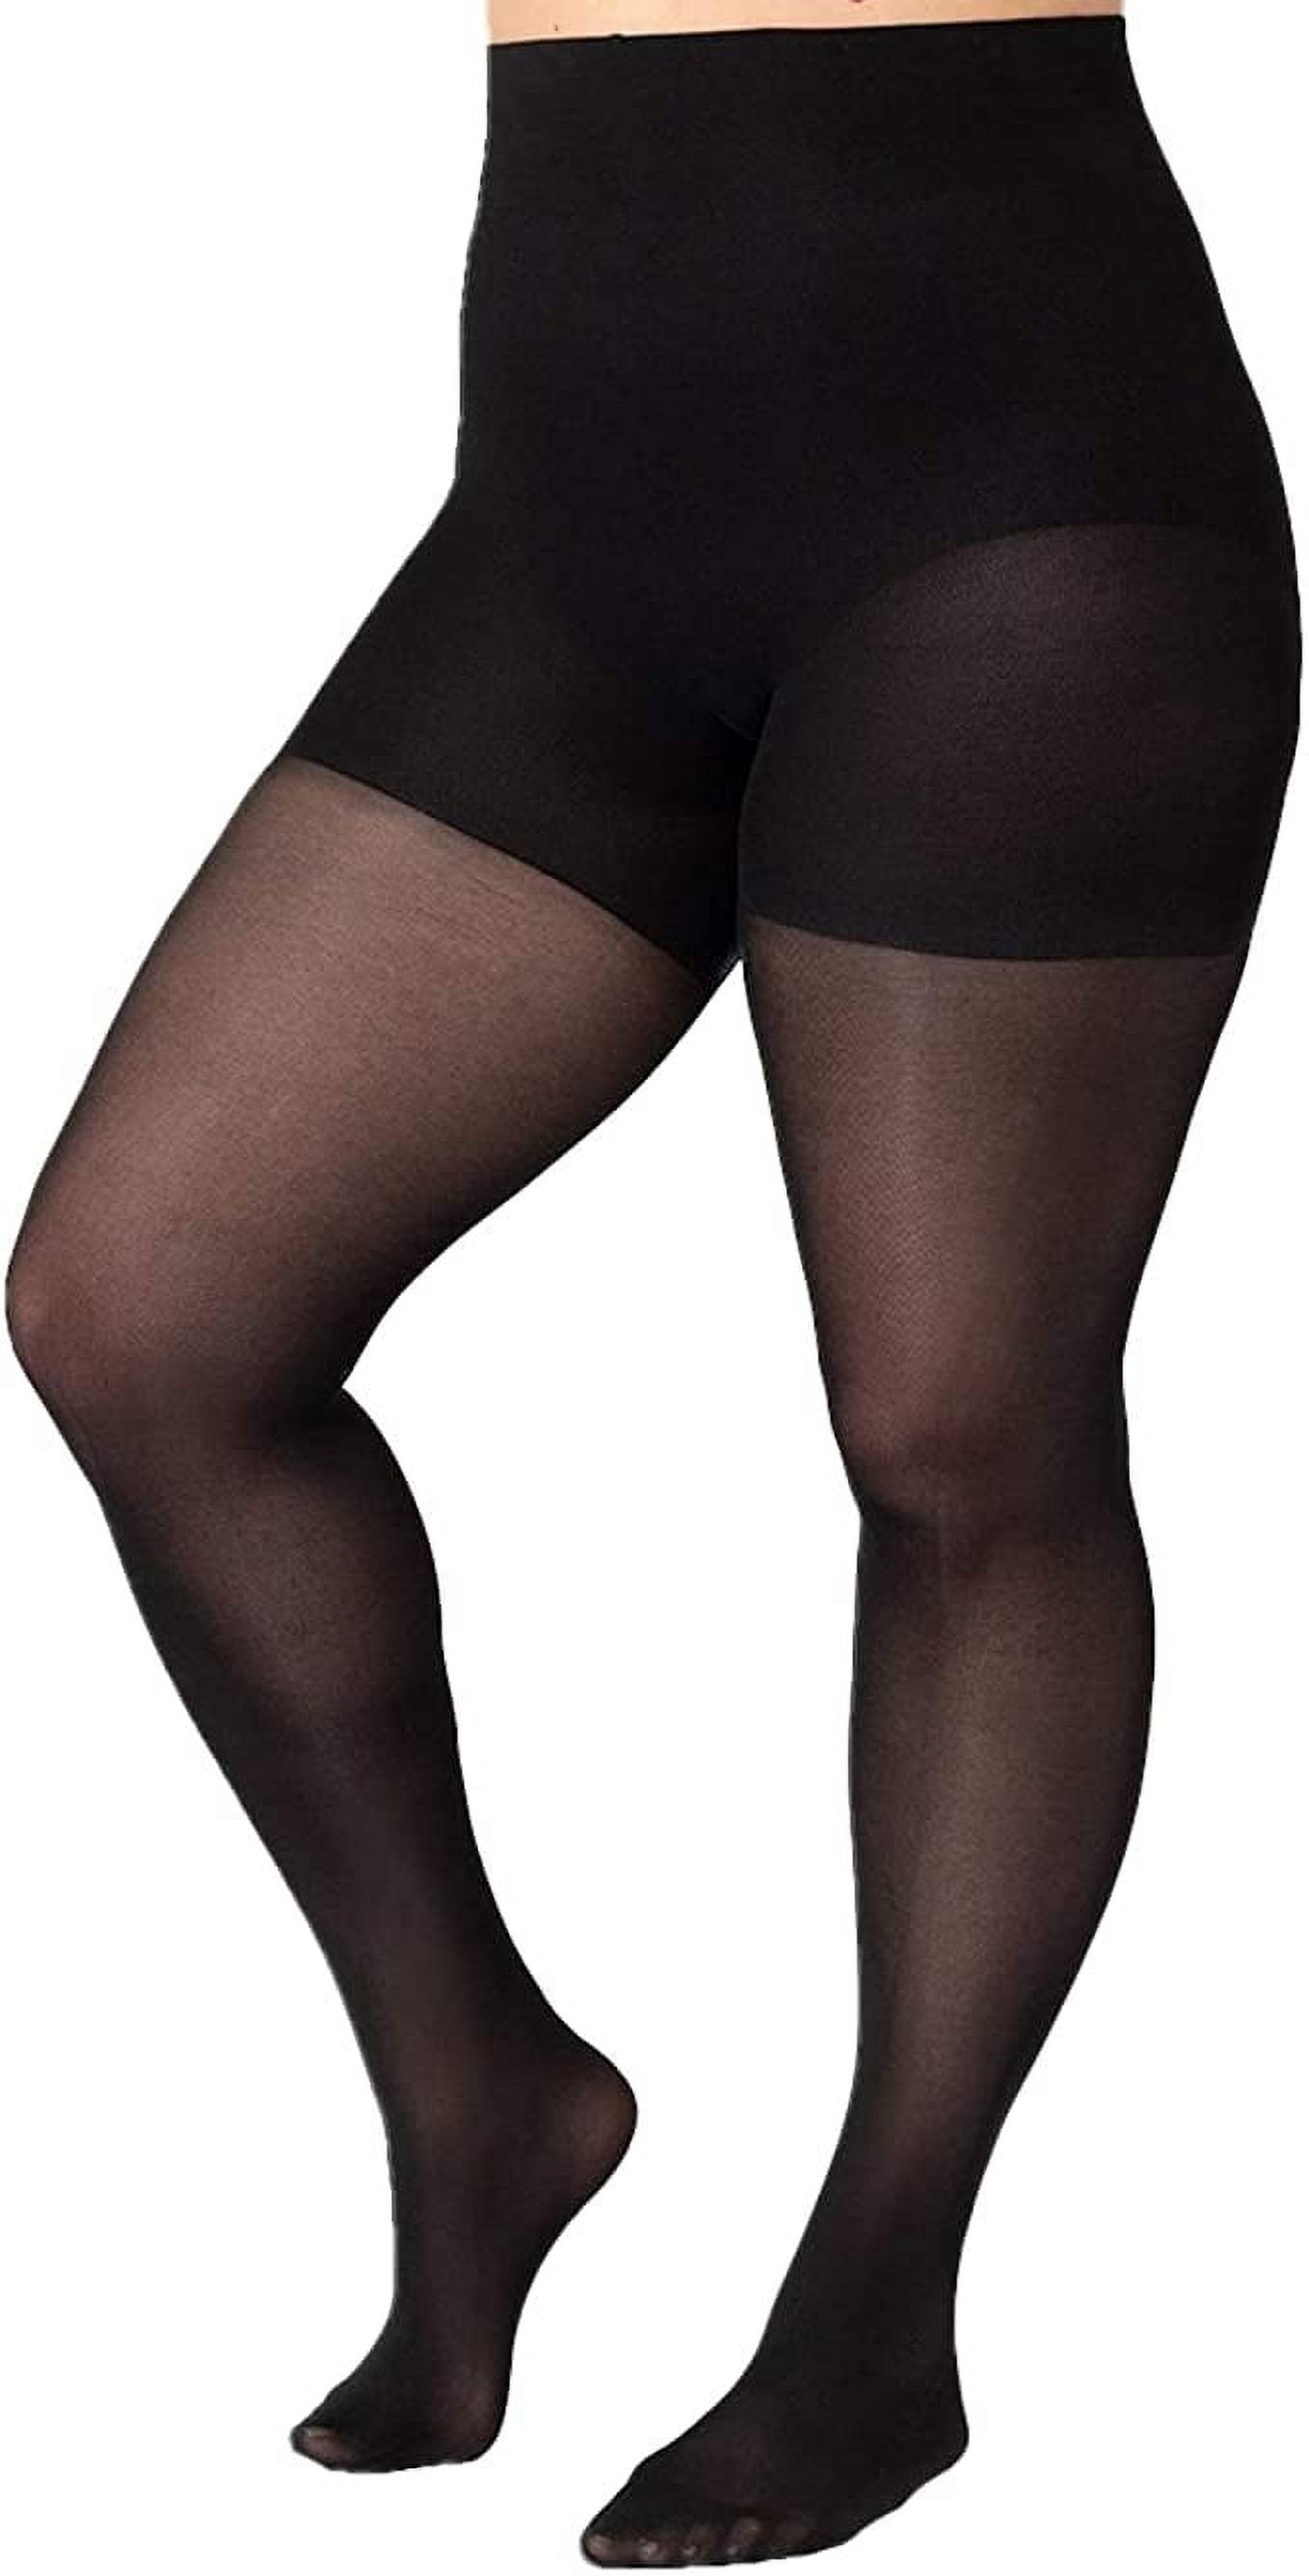 Shapermint Solid Black Opaque Tights with Nylon Control Top Hosiery  Pantyhose (XX-Large) 